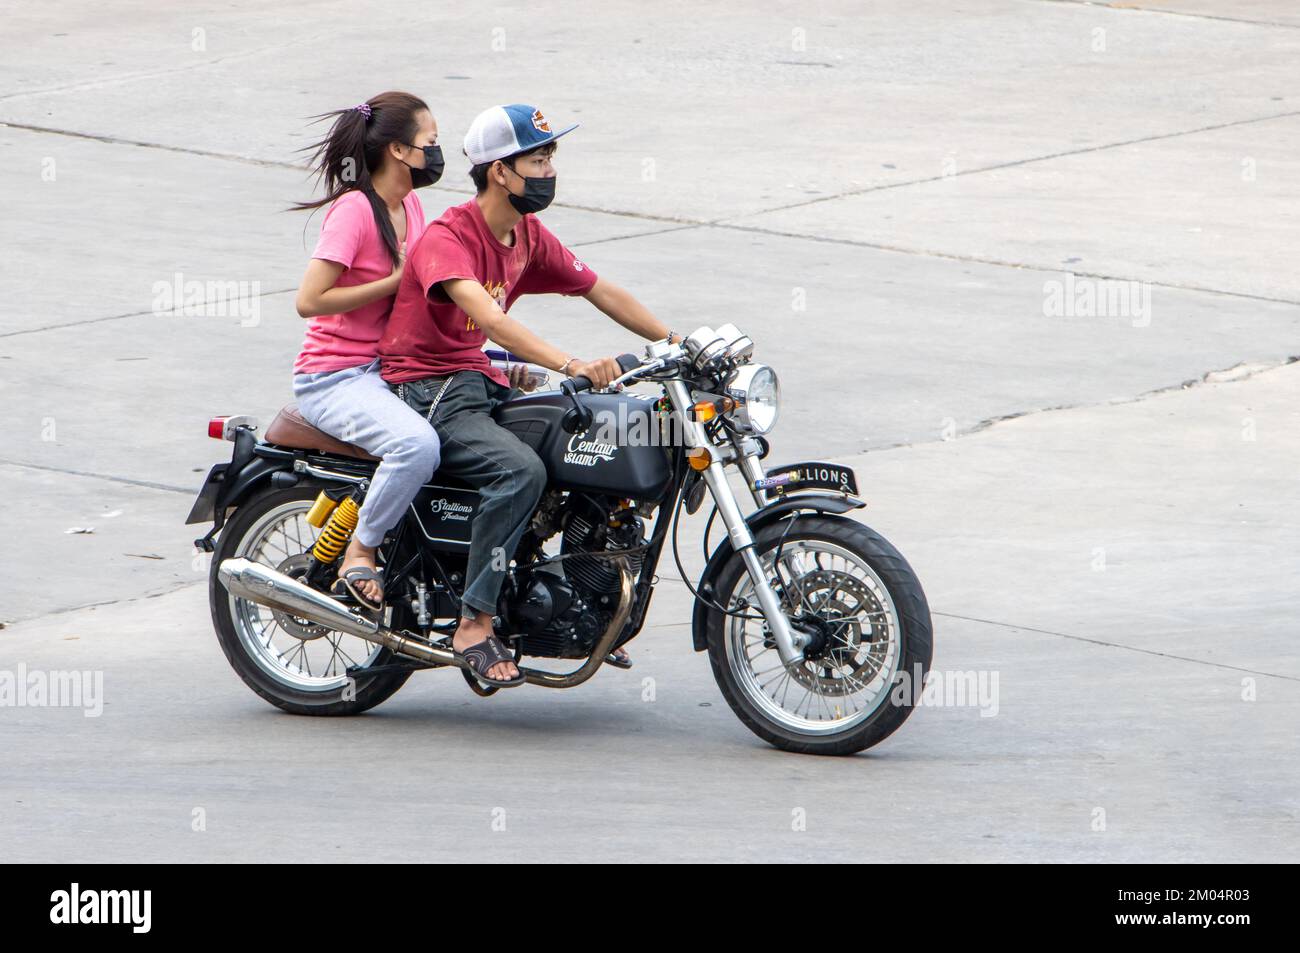 SAMUT PRAKAN, THAILAND, MARCH 02 2022, The pair rides on motorcycle at the street. Stock Photo